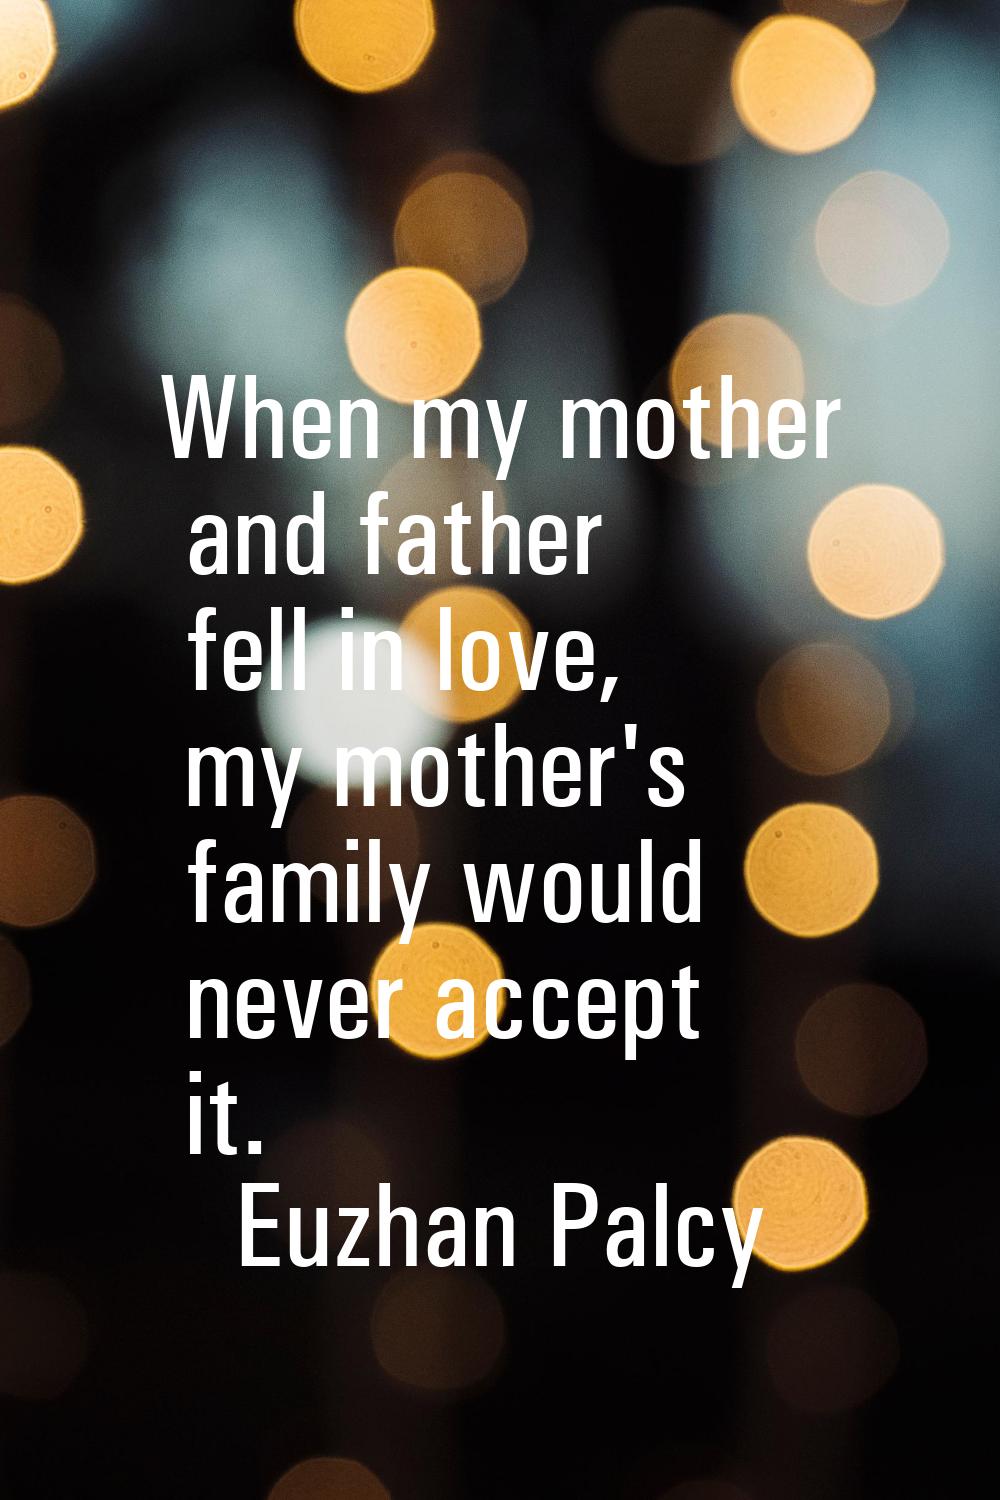 When my mother and father fell in love, my mother's family would never accept it.